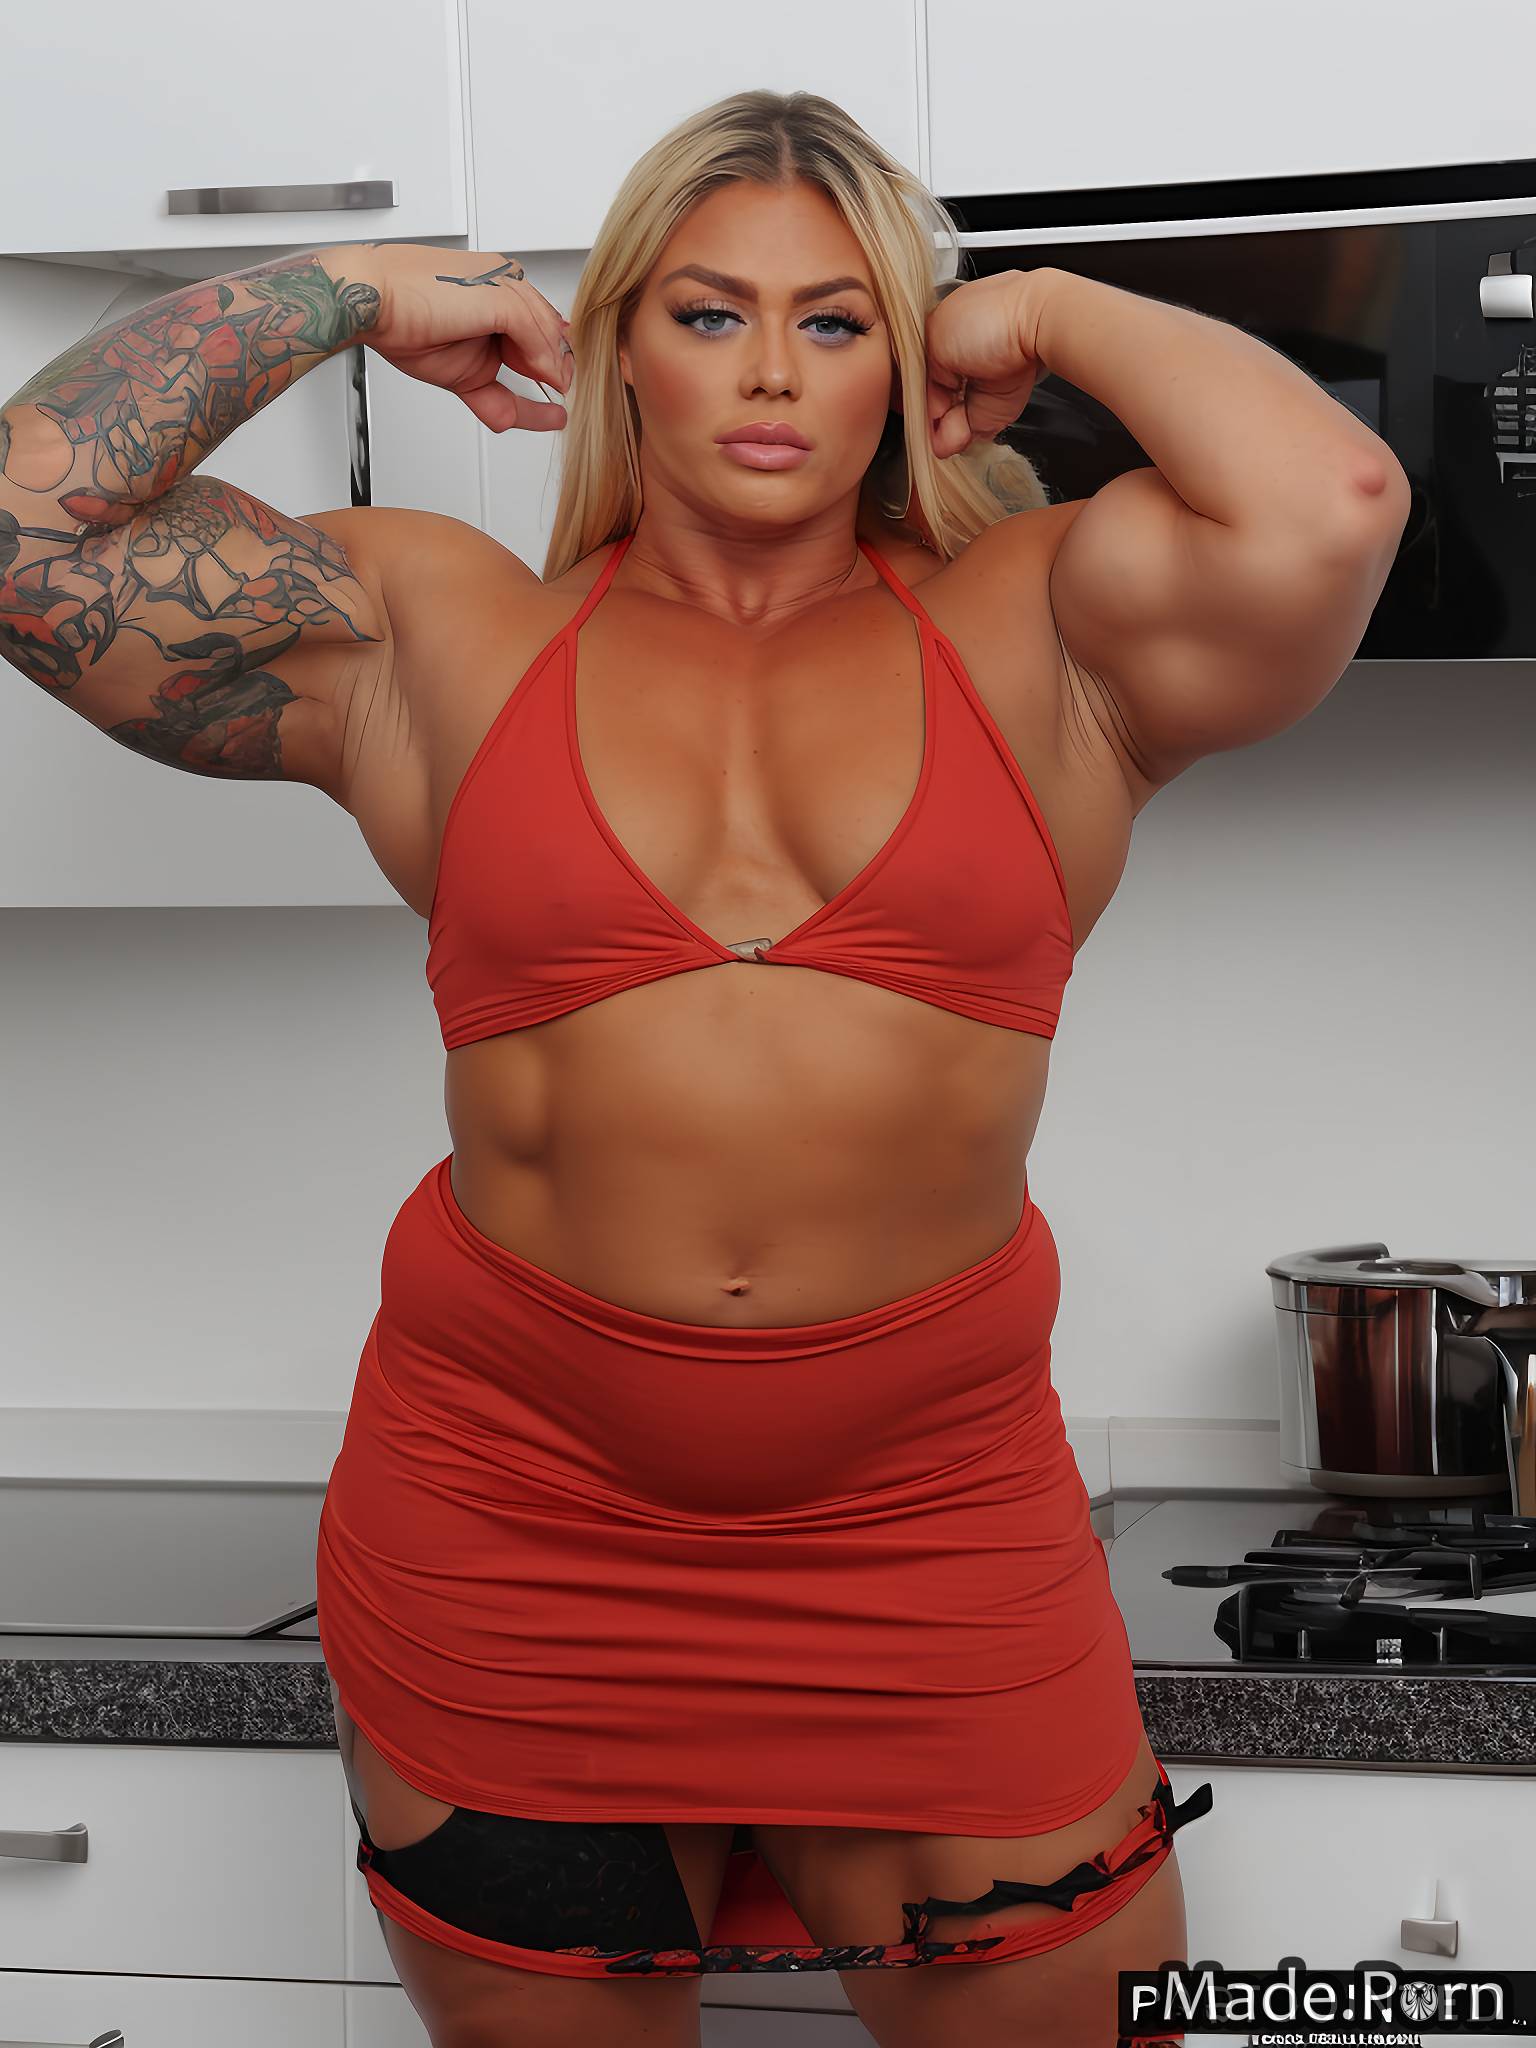 athlete athlete blouse thick thighs muscular armpits gigantic boobs